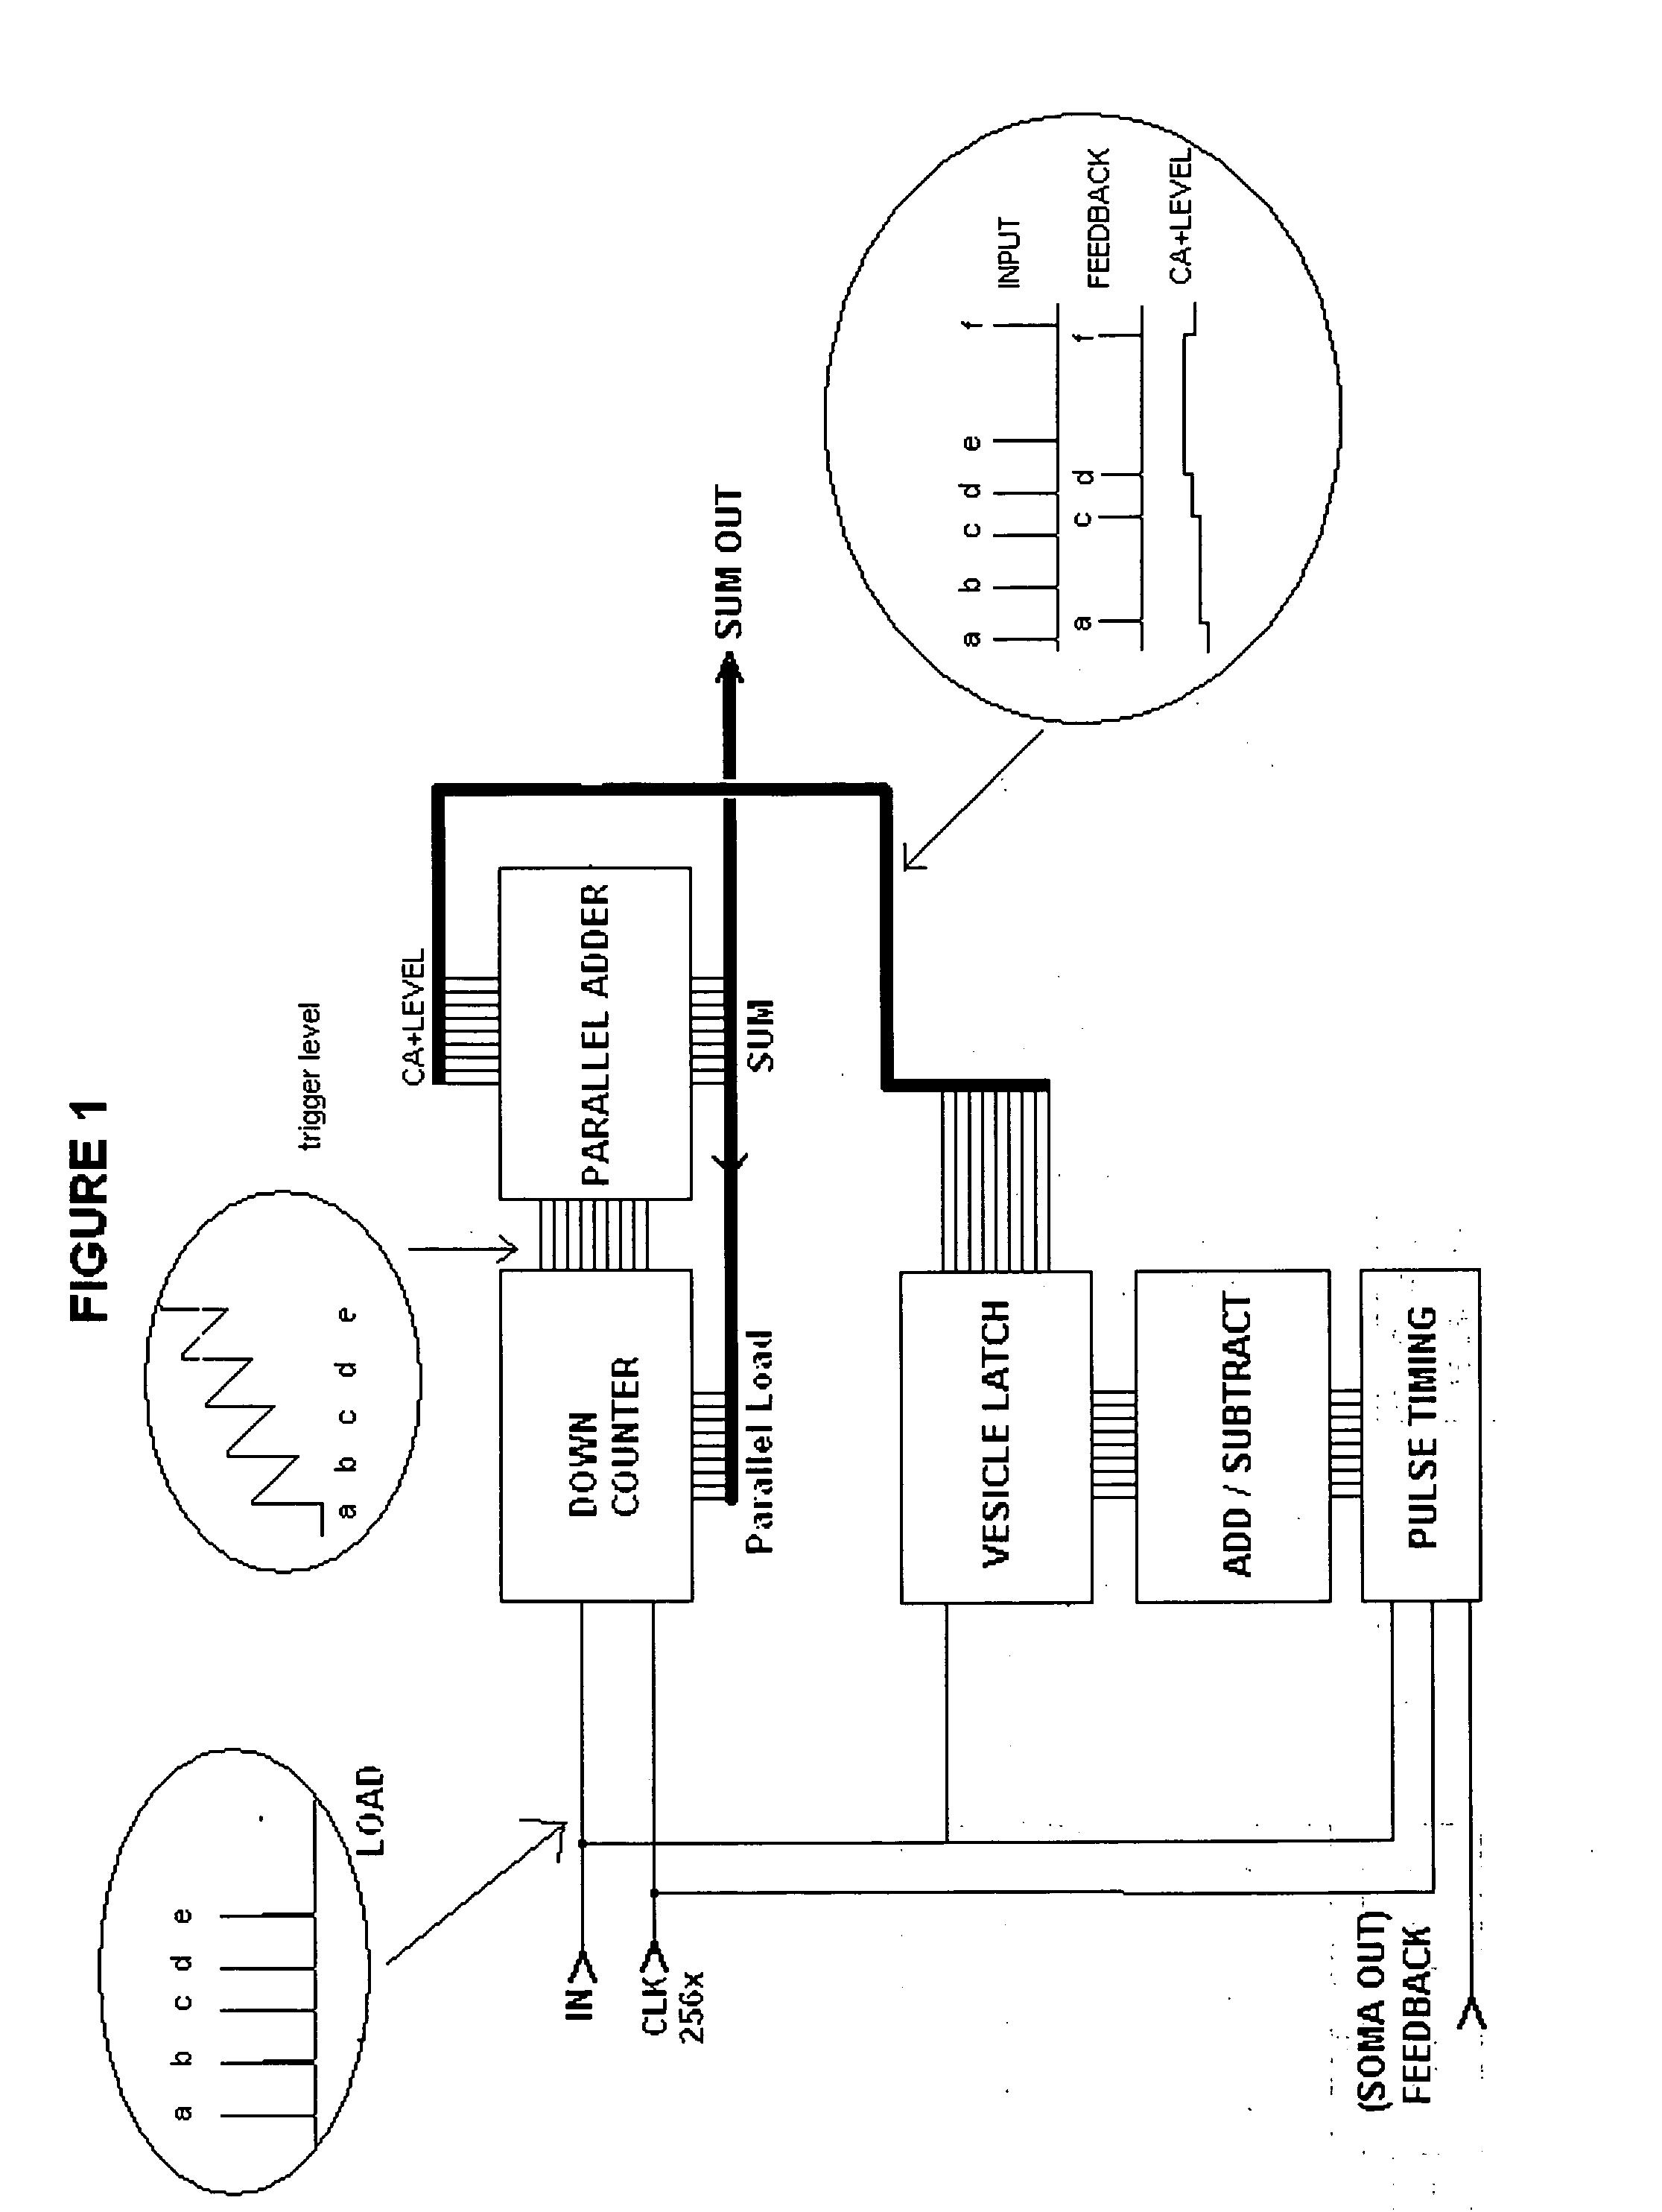 Autonomous Learning Dynamic Artificial Neural Computing Device and Brain Inspired System